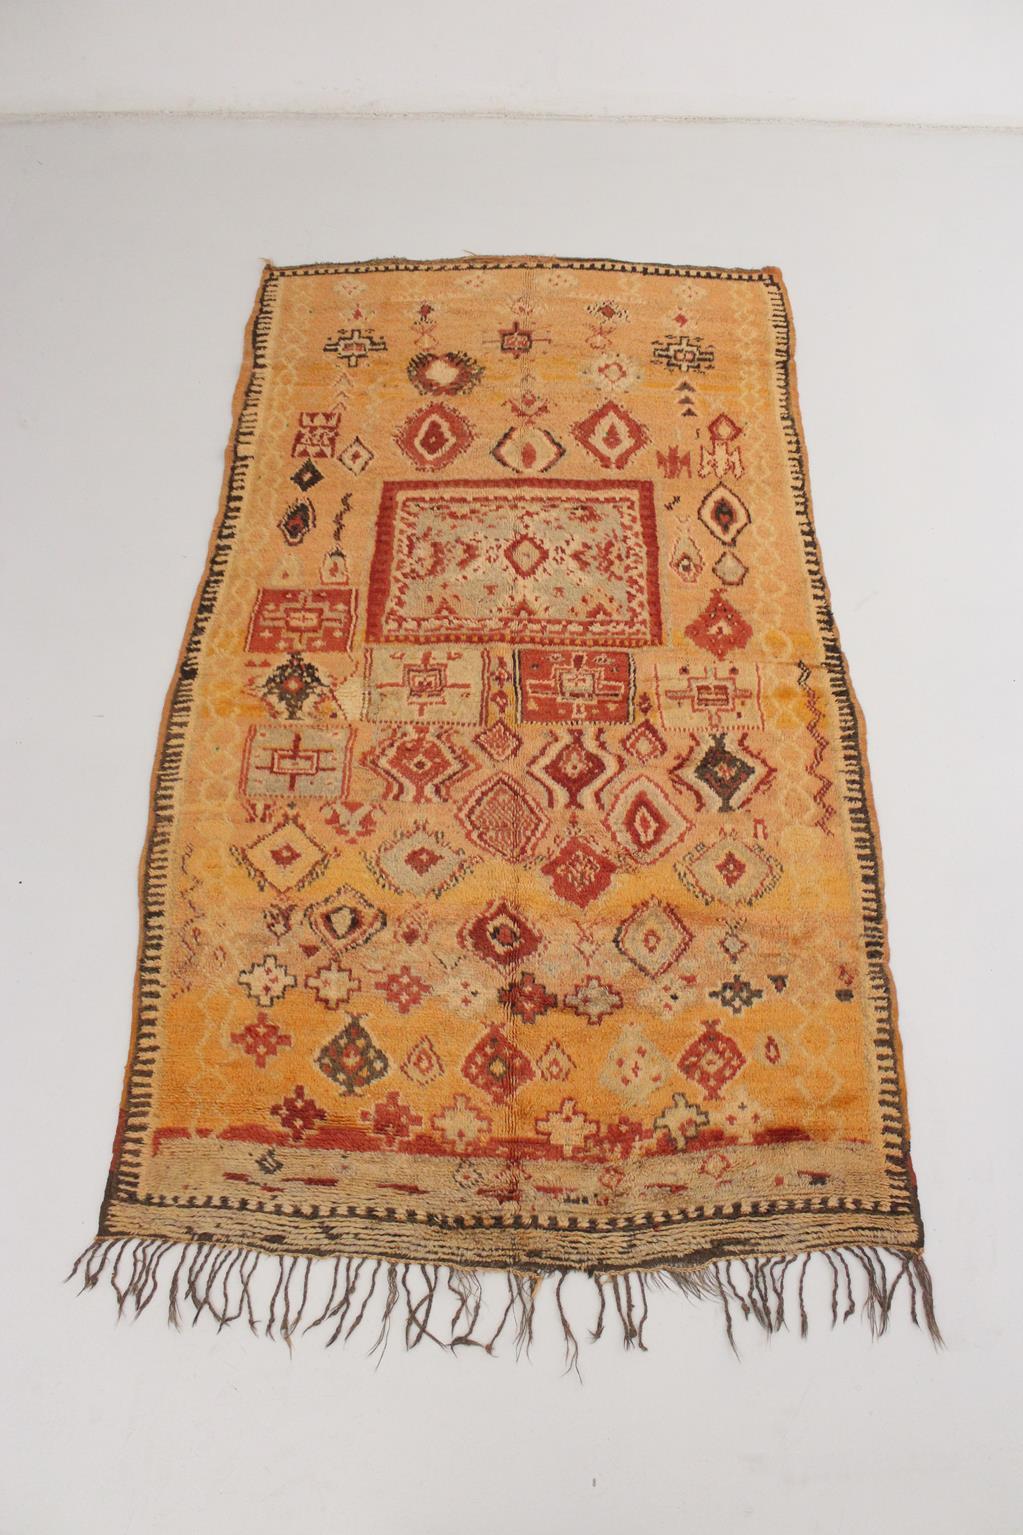 This rare vintage rug was made in the area of Taznakht, Morocco.

The main color I would call it 